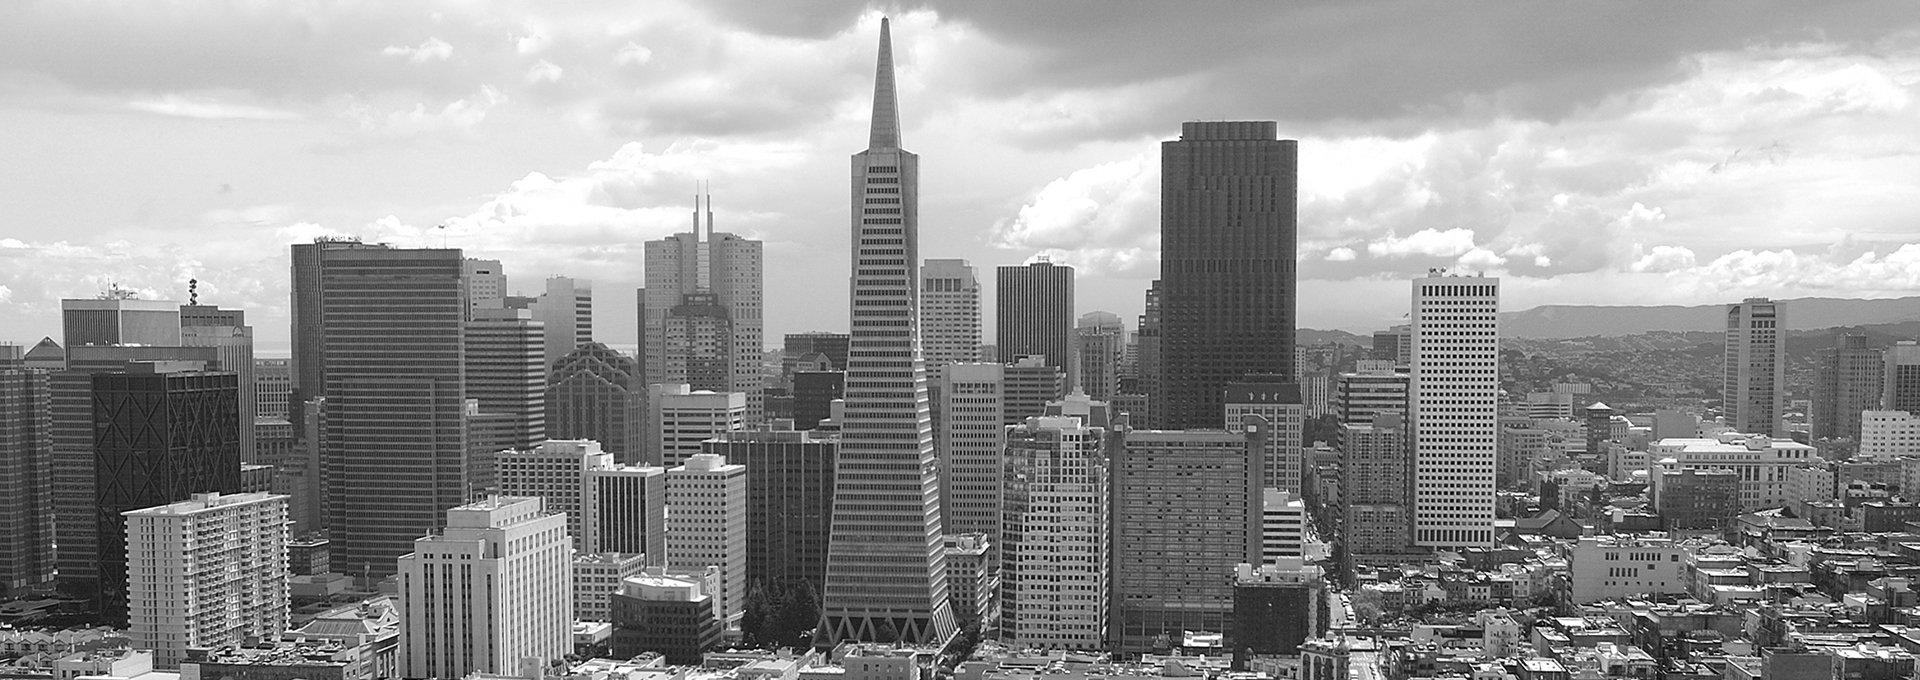 San Francisco skyline in black and white - Design Accounting Solutions